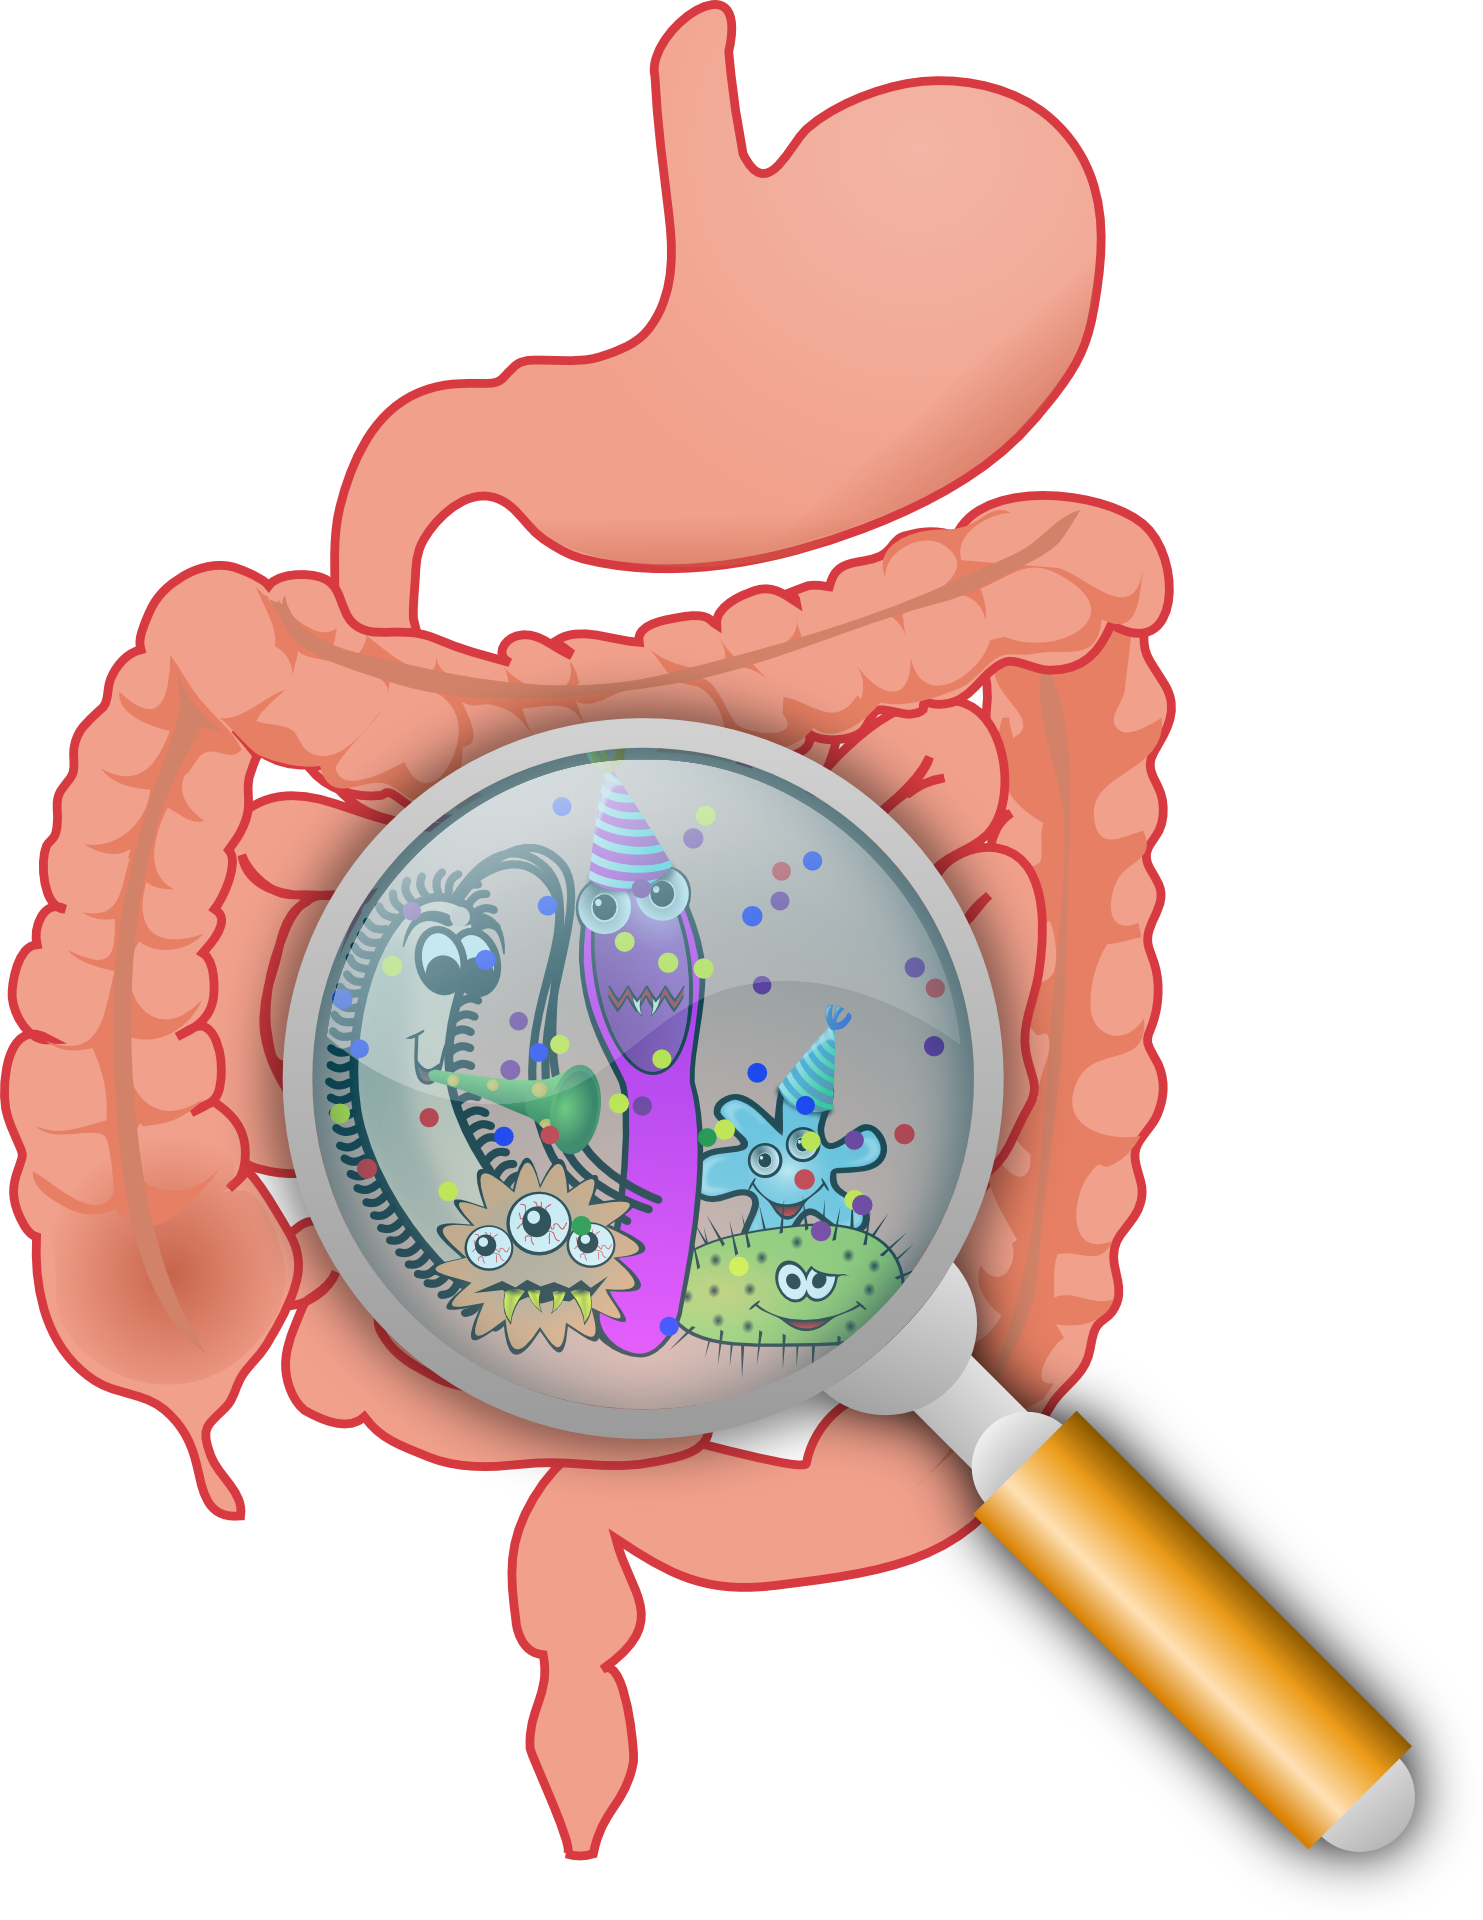 Liver clipart fatty liver. My journey of living